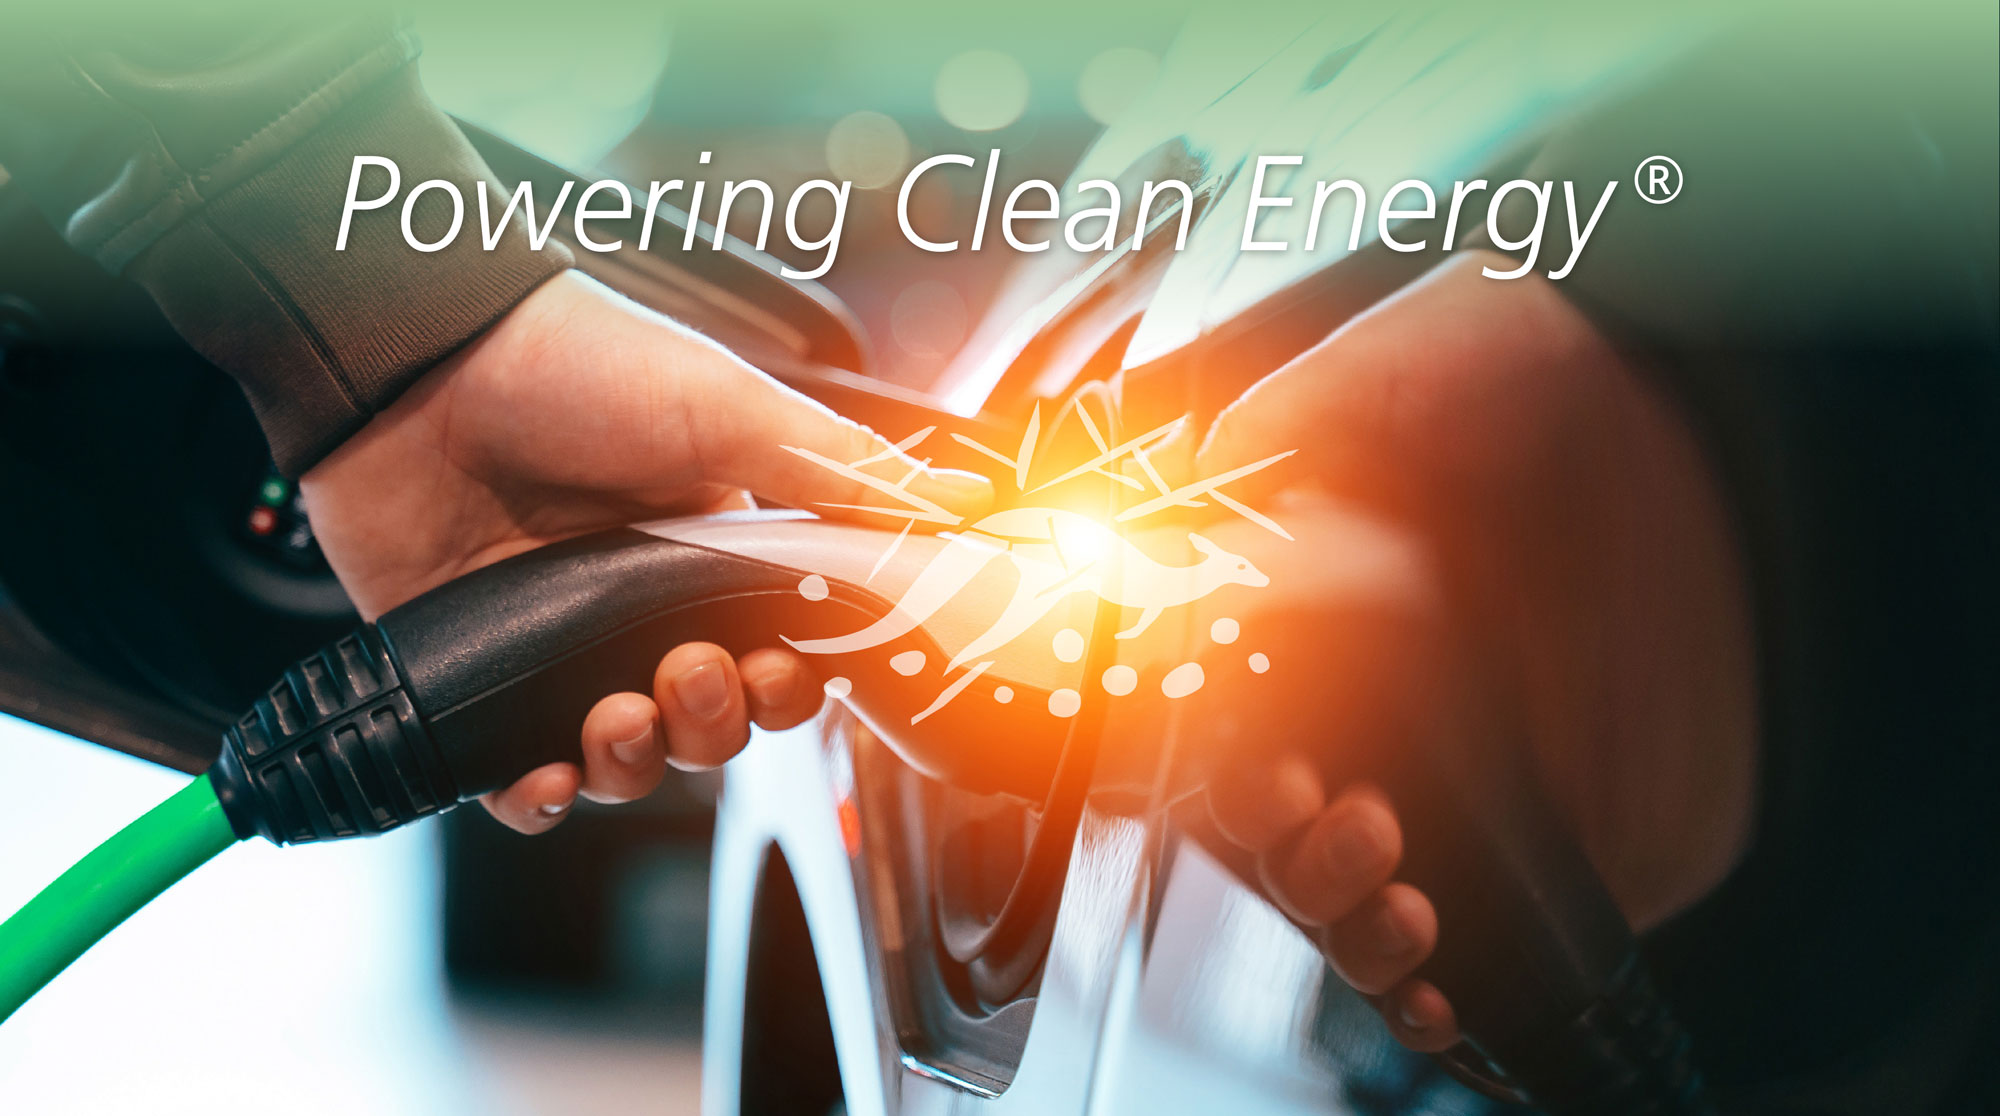 An image of a kangaroo and the branding slogan "Powering Clean Energy" from Renascor Resources are displayed besides a person holding a plug to charge an electric car.